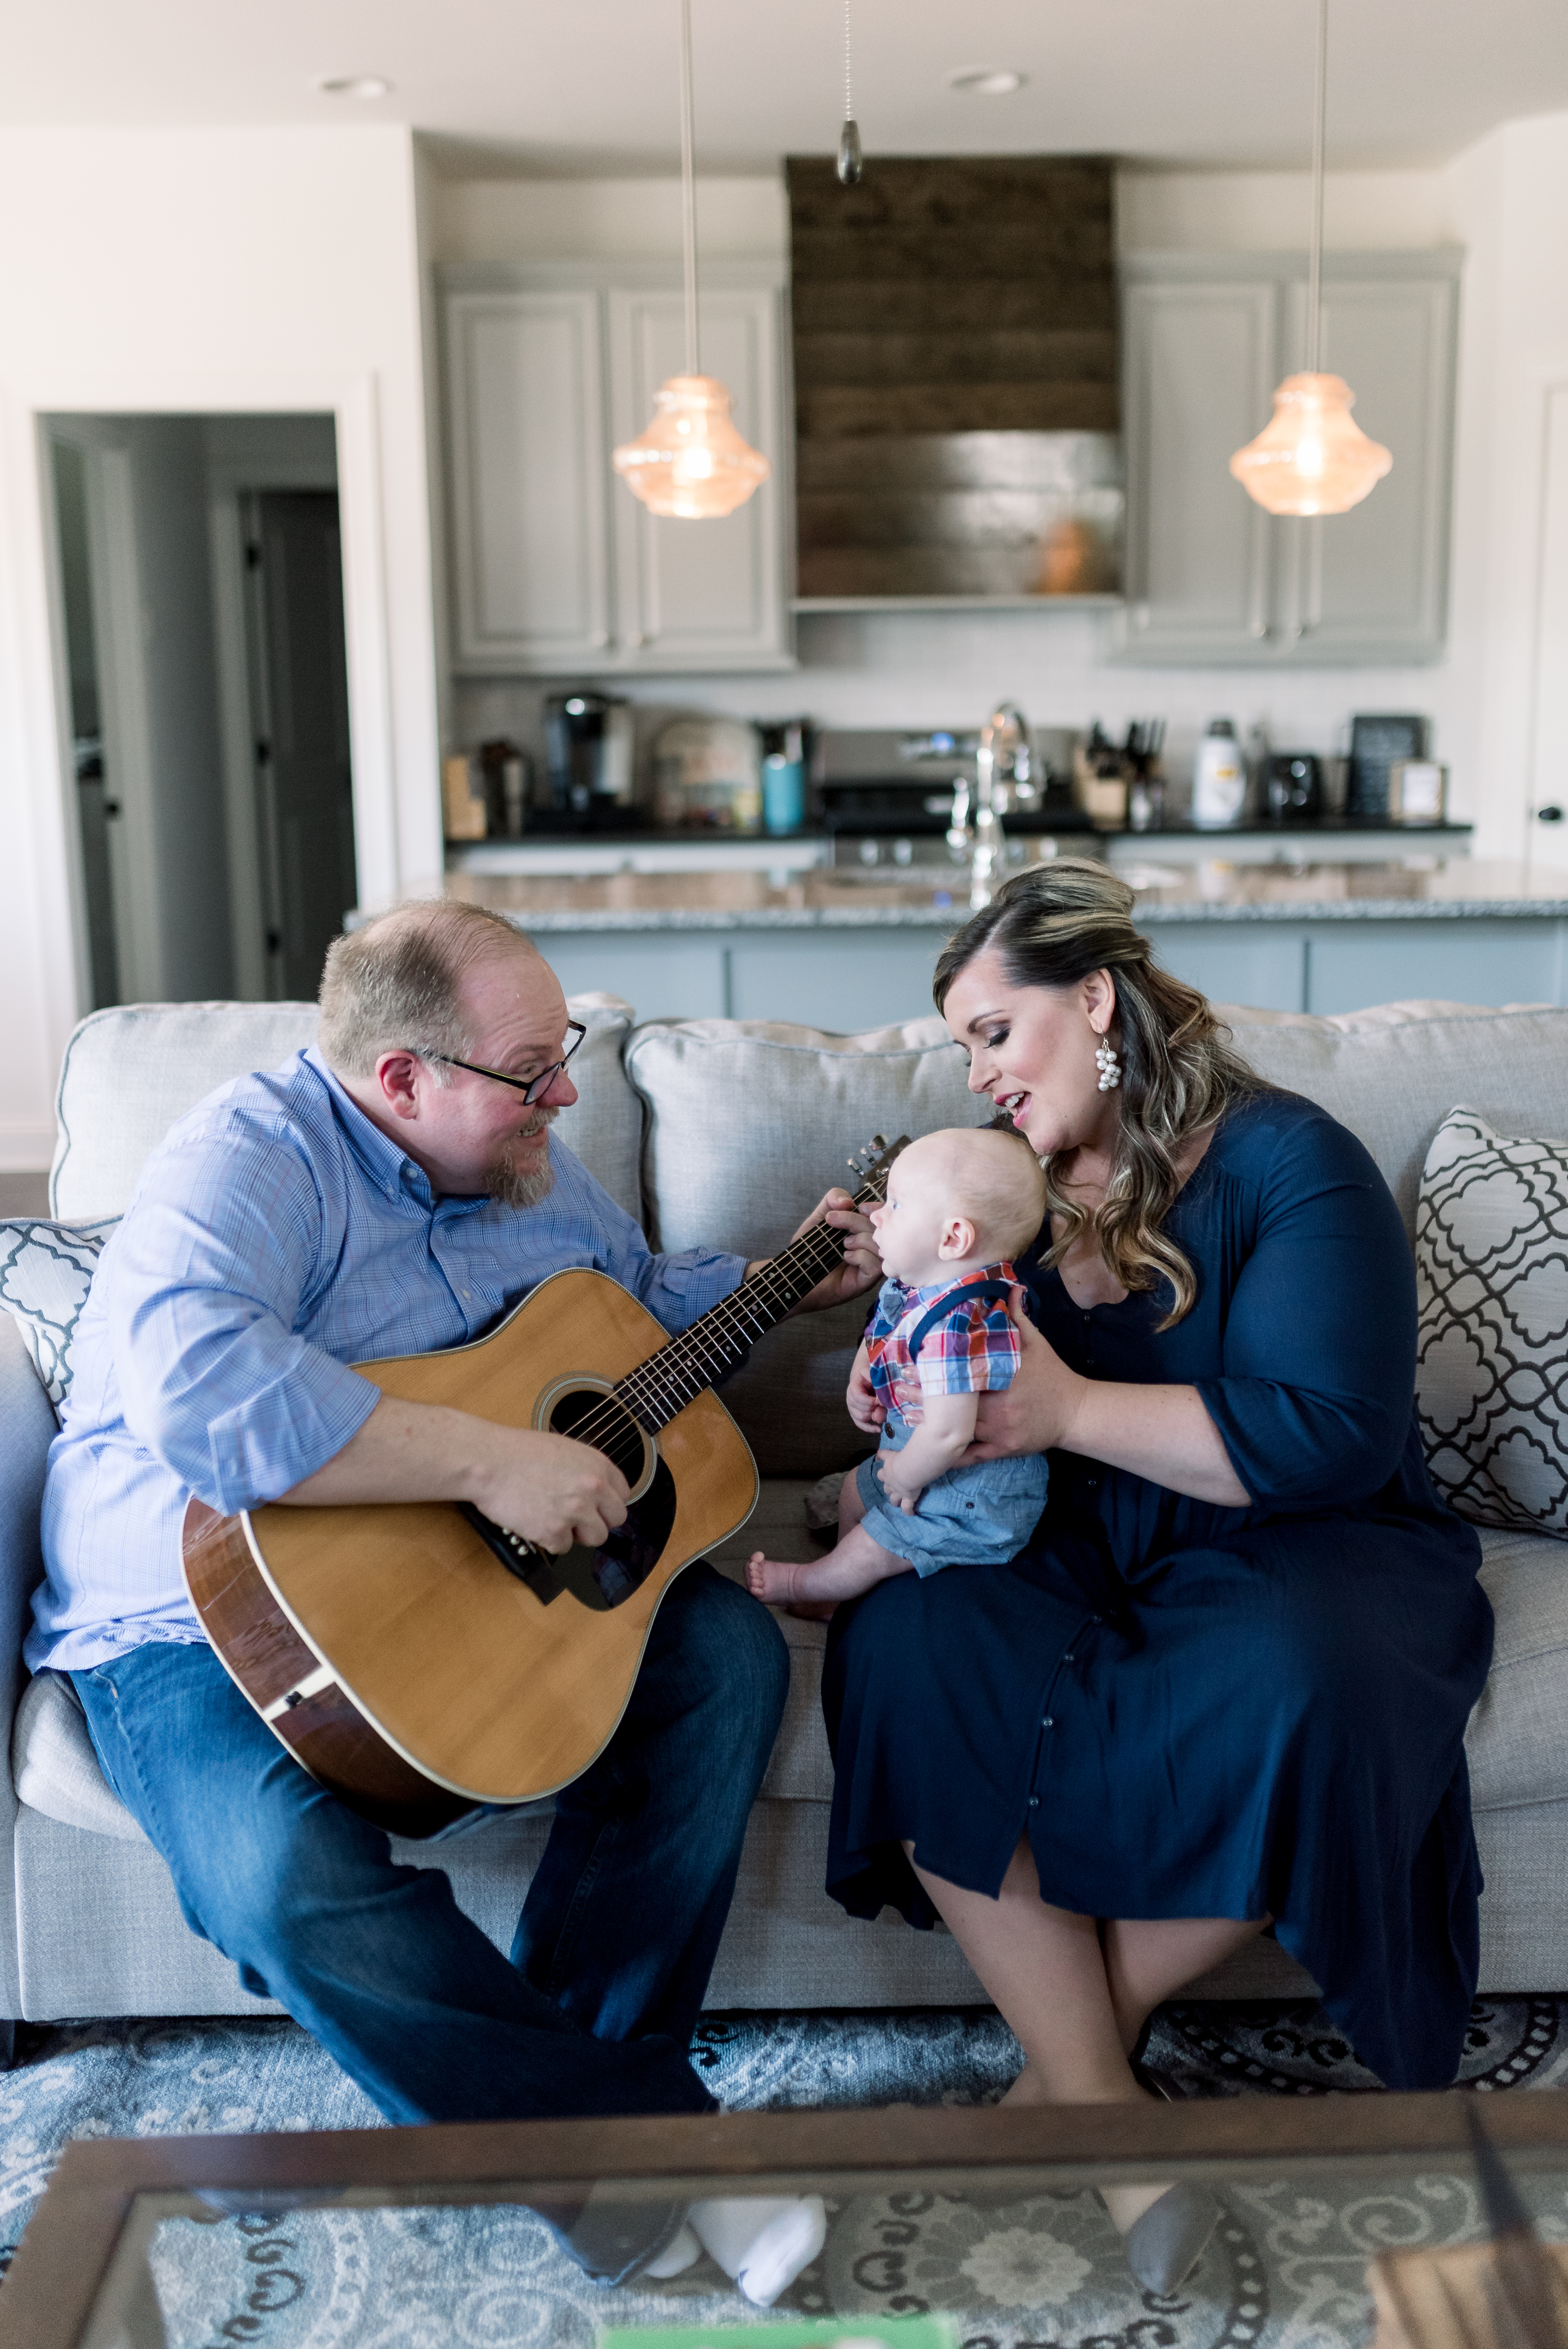 Dolly DeLong Photography Nashville Family Photographer and Middle TN Family Photographer Shares her best tips and secrets with working with children for sessions